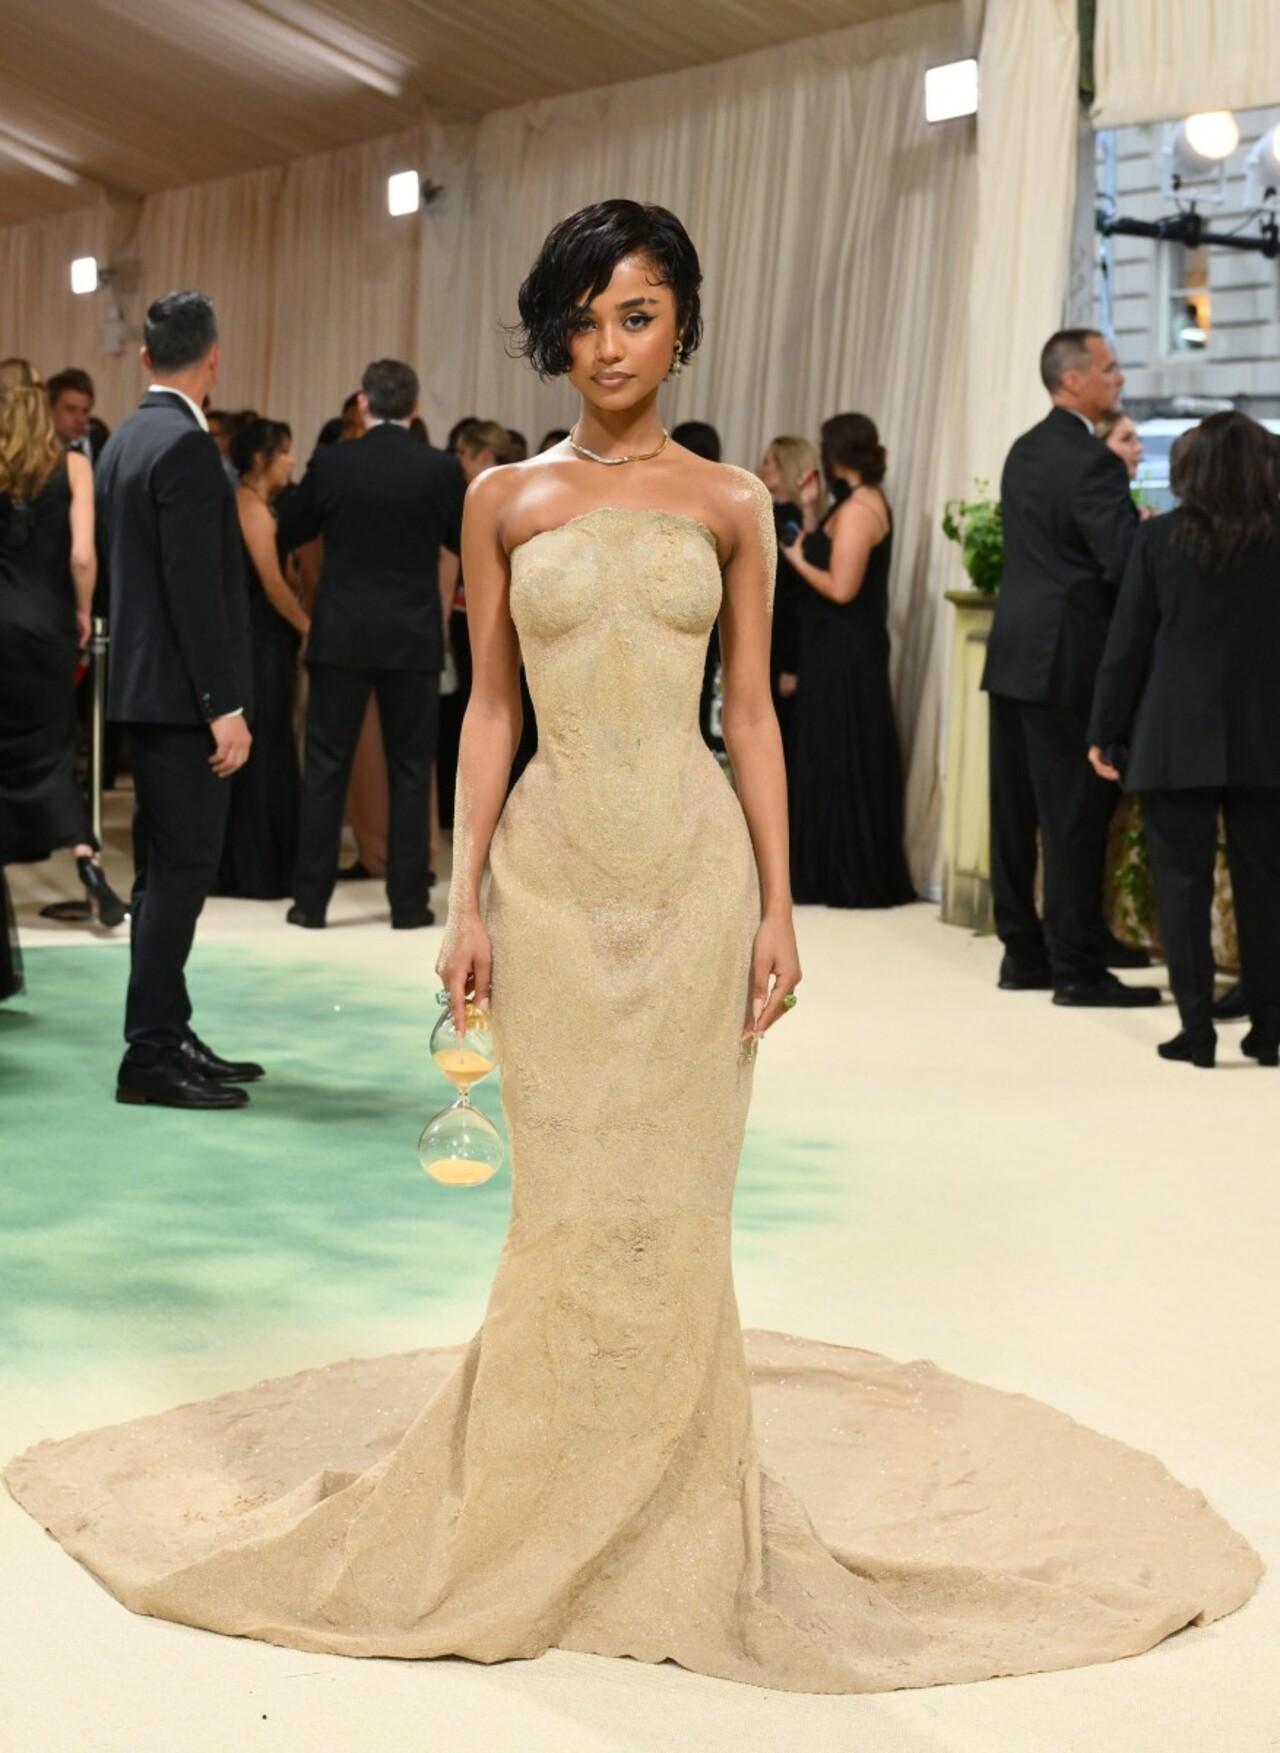 Tyla made her Met Gala debut in a form-fitting Balmain outfit inspired by 